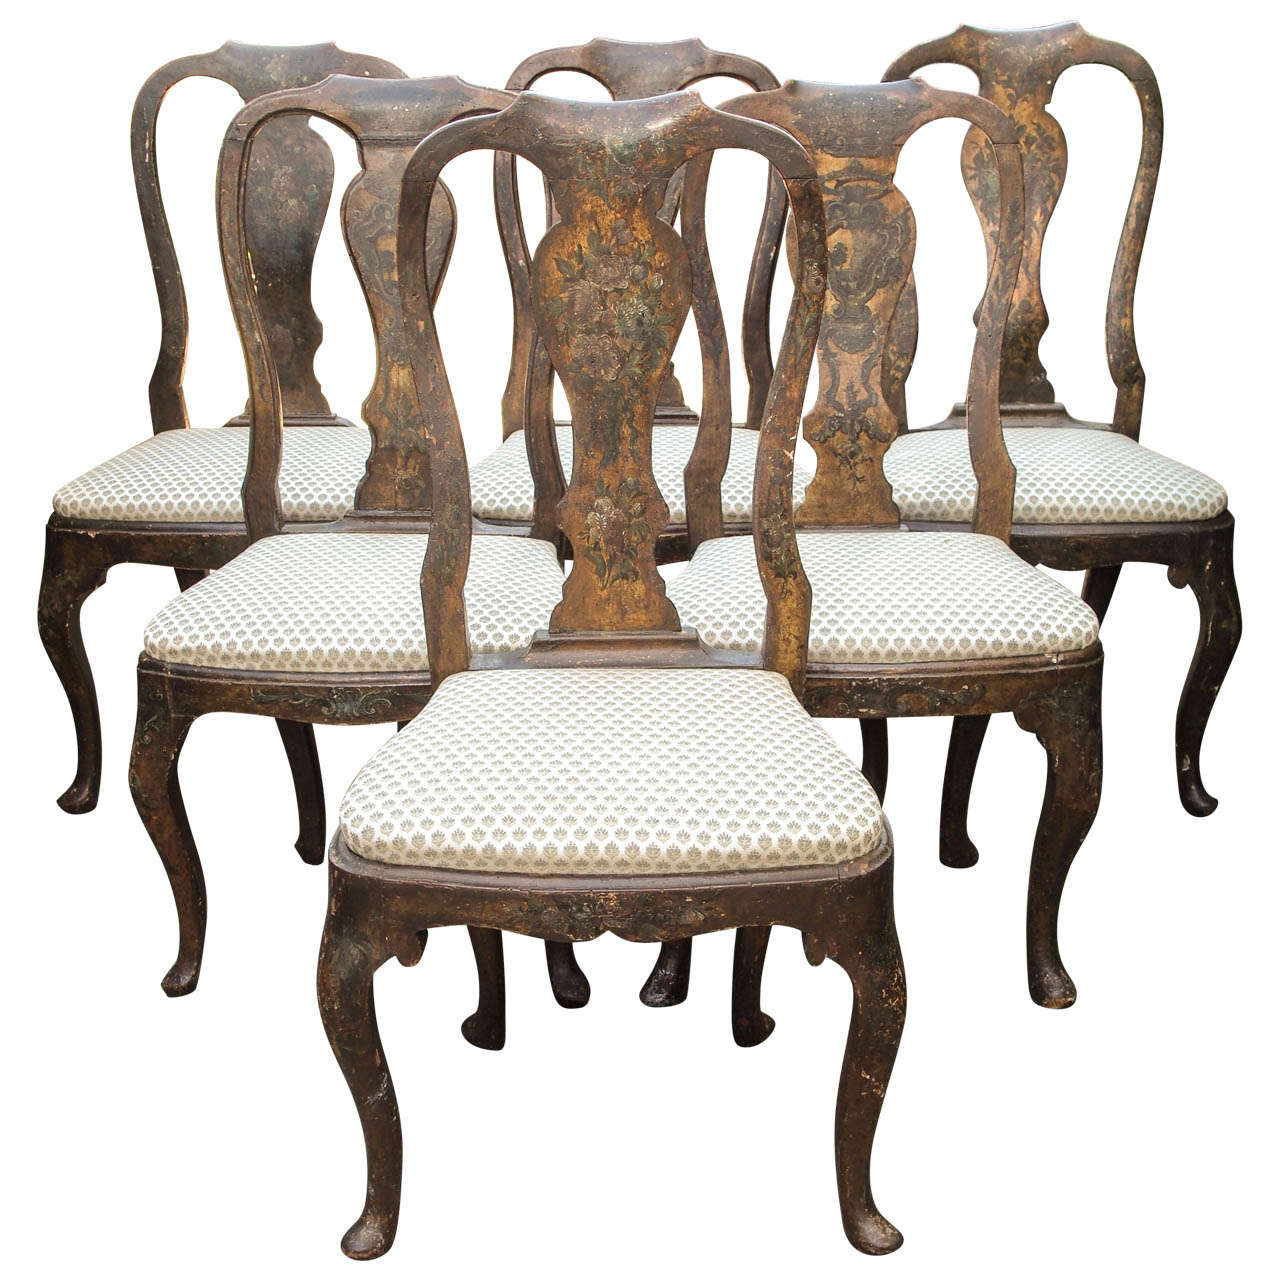 Set of Six 18th Century Hand-Painted Italian, Lucca  Vase Splat-Back Chairs